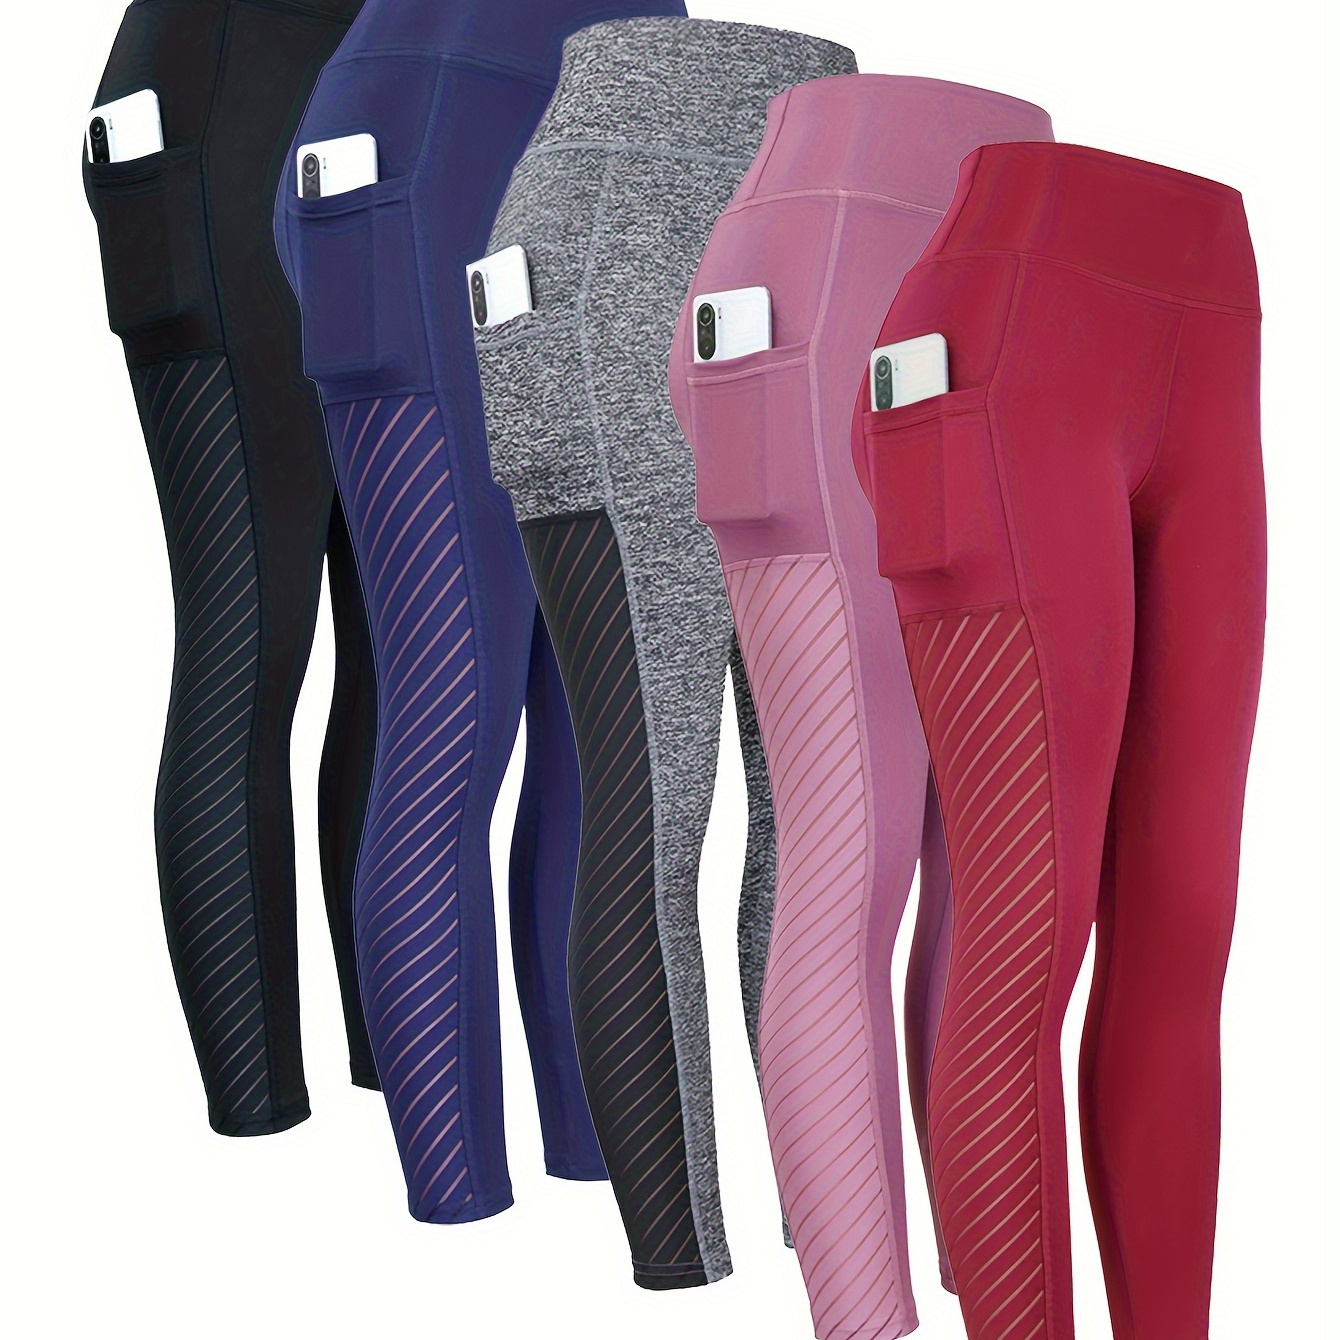 

5pcs Yoga Pants With Pocket, Solid Color Stretch Fitness Sports Leggings, Women's Activewear